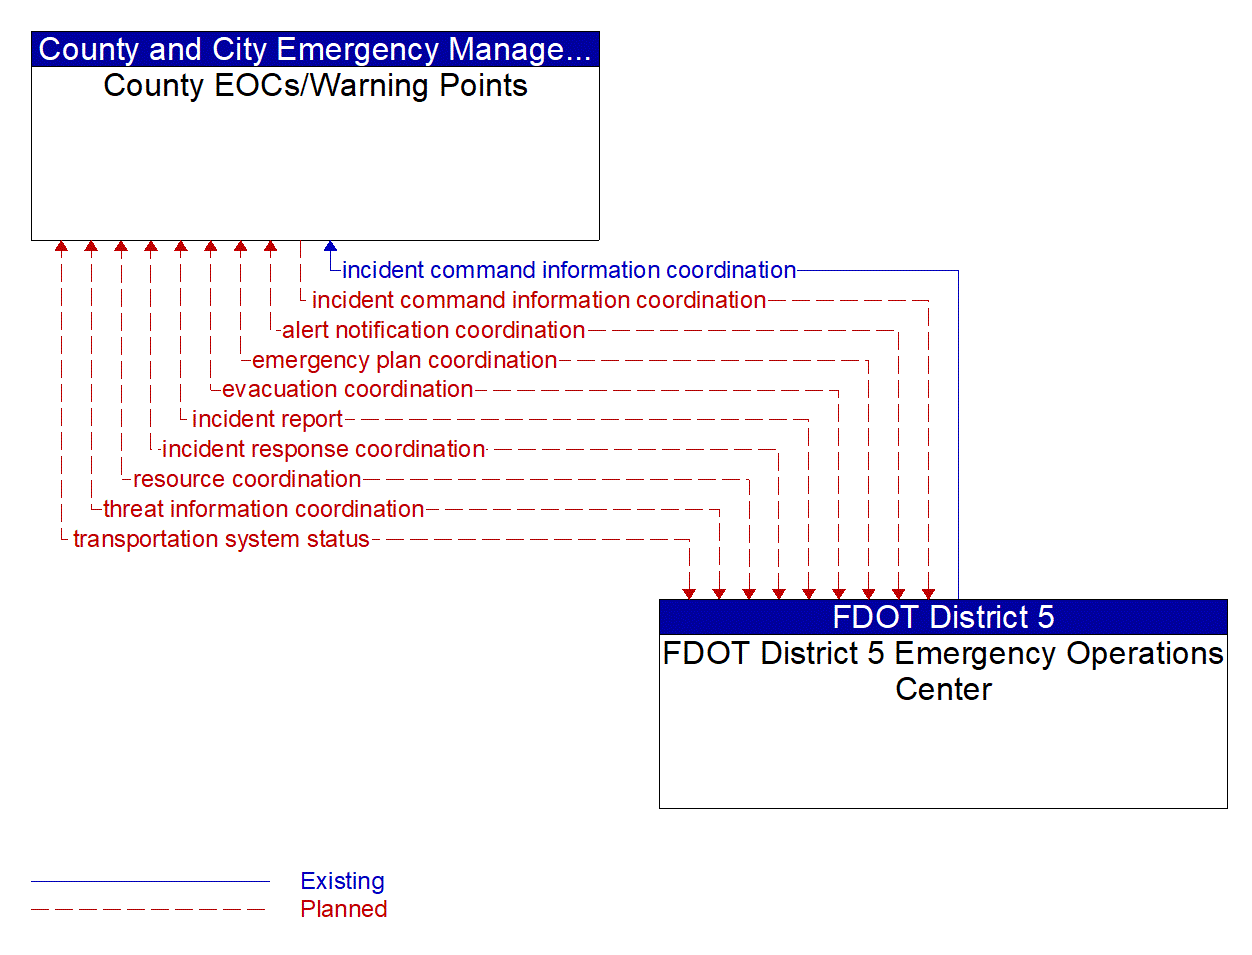 Architecture Flow Diagram: FDOT District 5 Emergency Operations Center <--> County EOCs/Warning Points